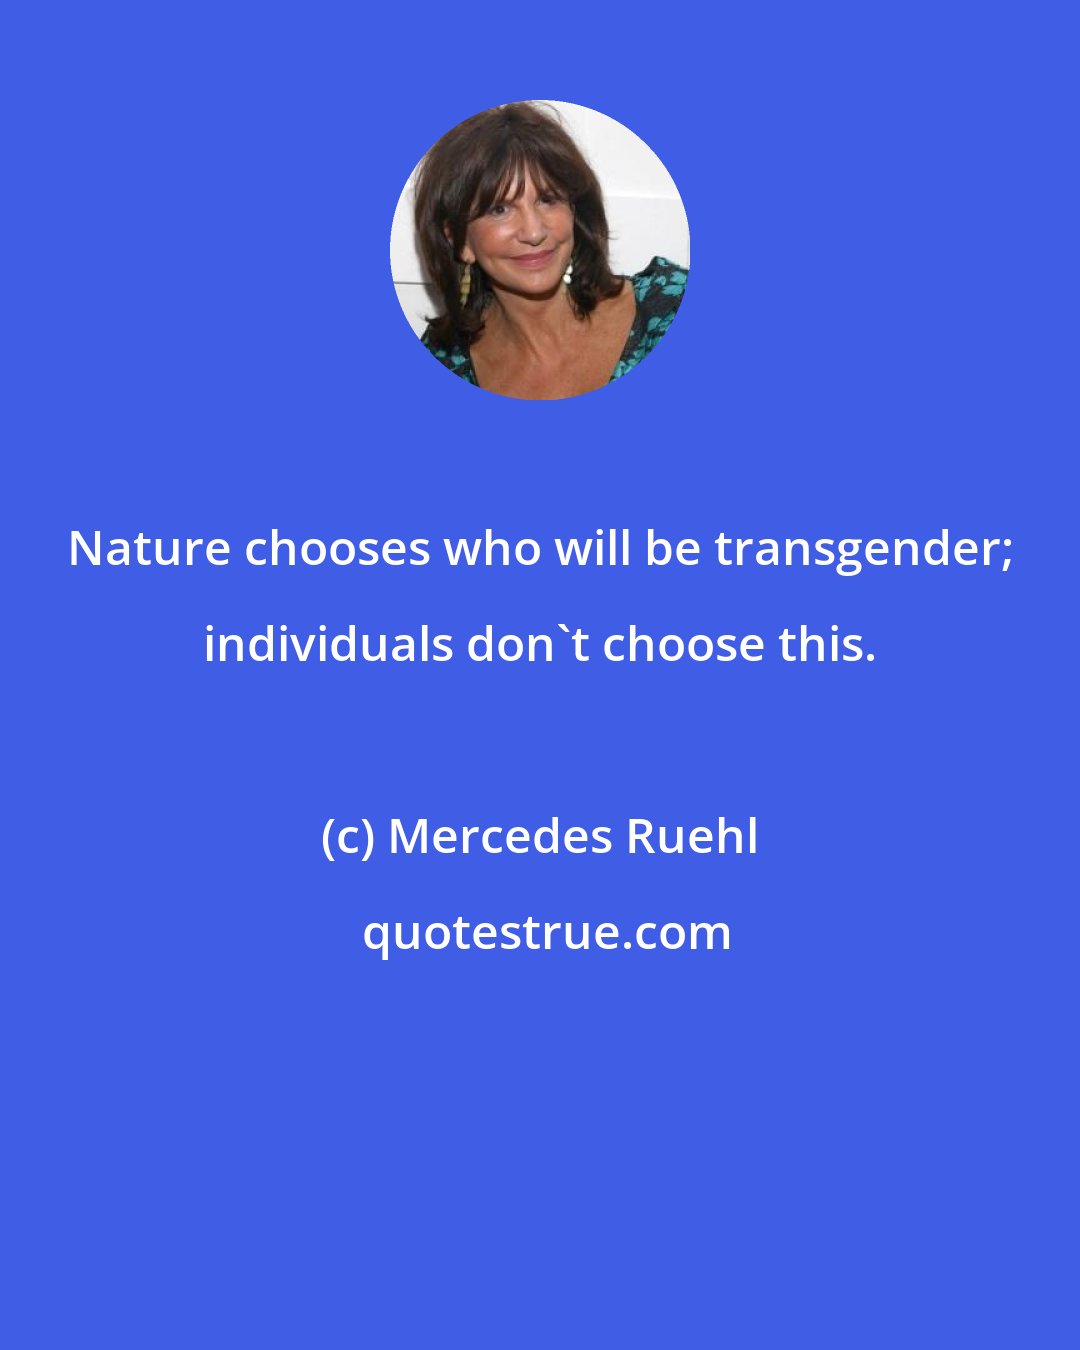 Mercedes Ruehl: Nature chooses who will be transgender; individuals don't choose this.